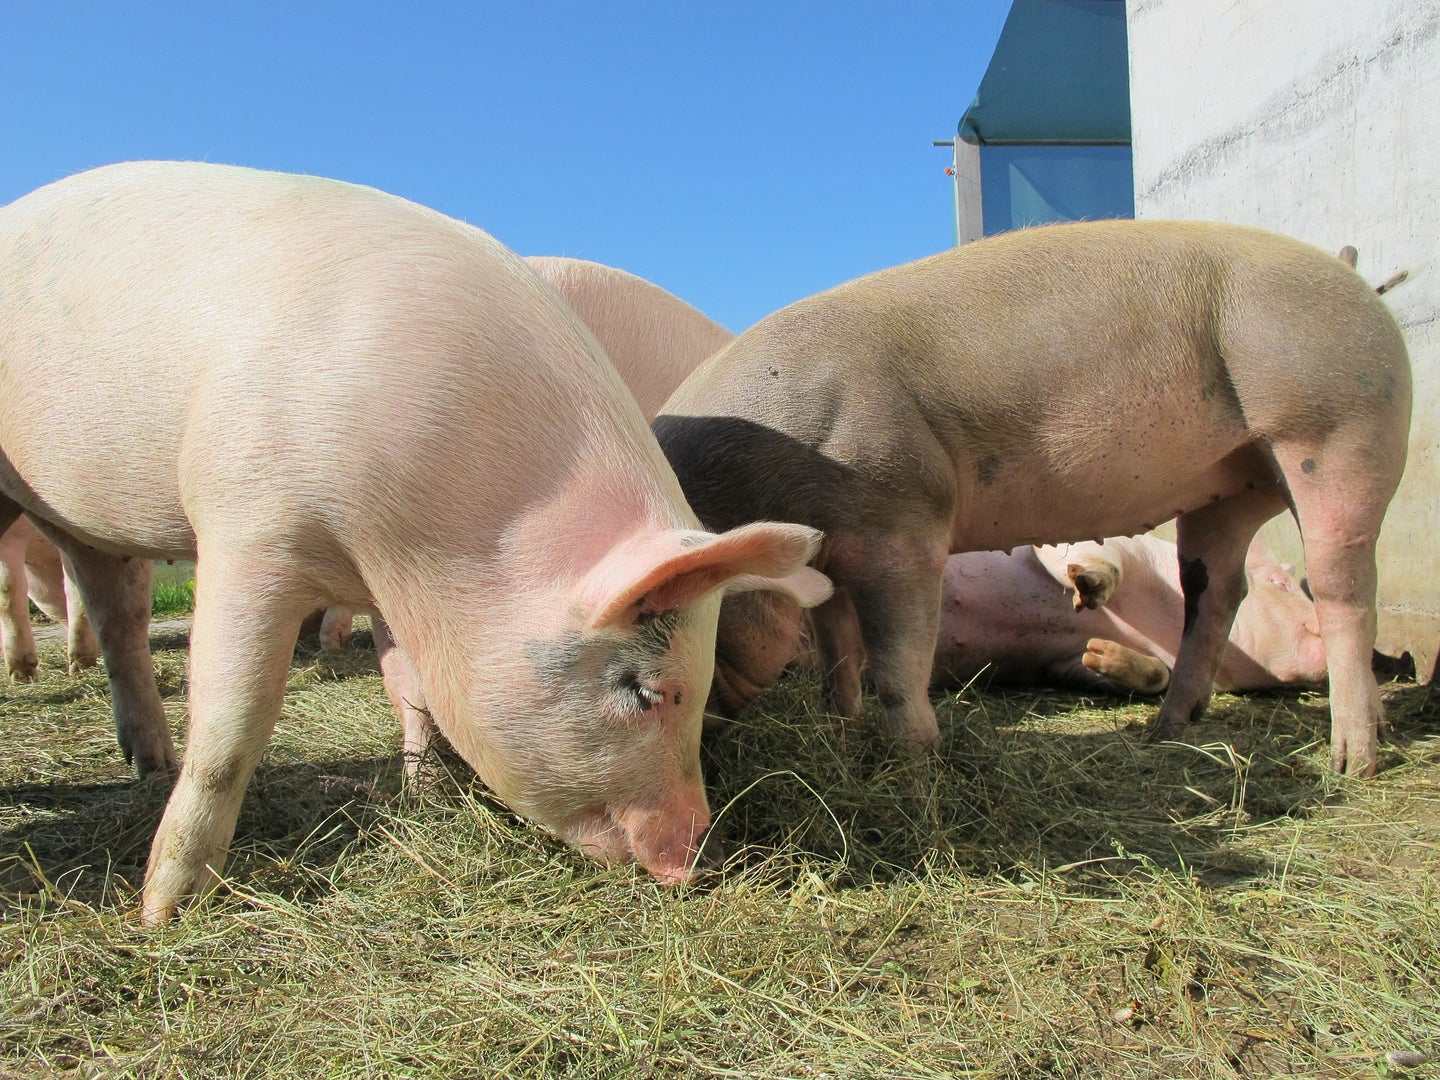 Biotech Company Is Developing Transplantable Pig Organs For Humans